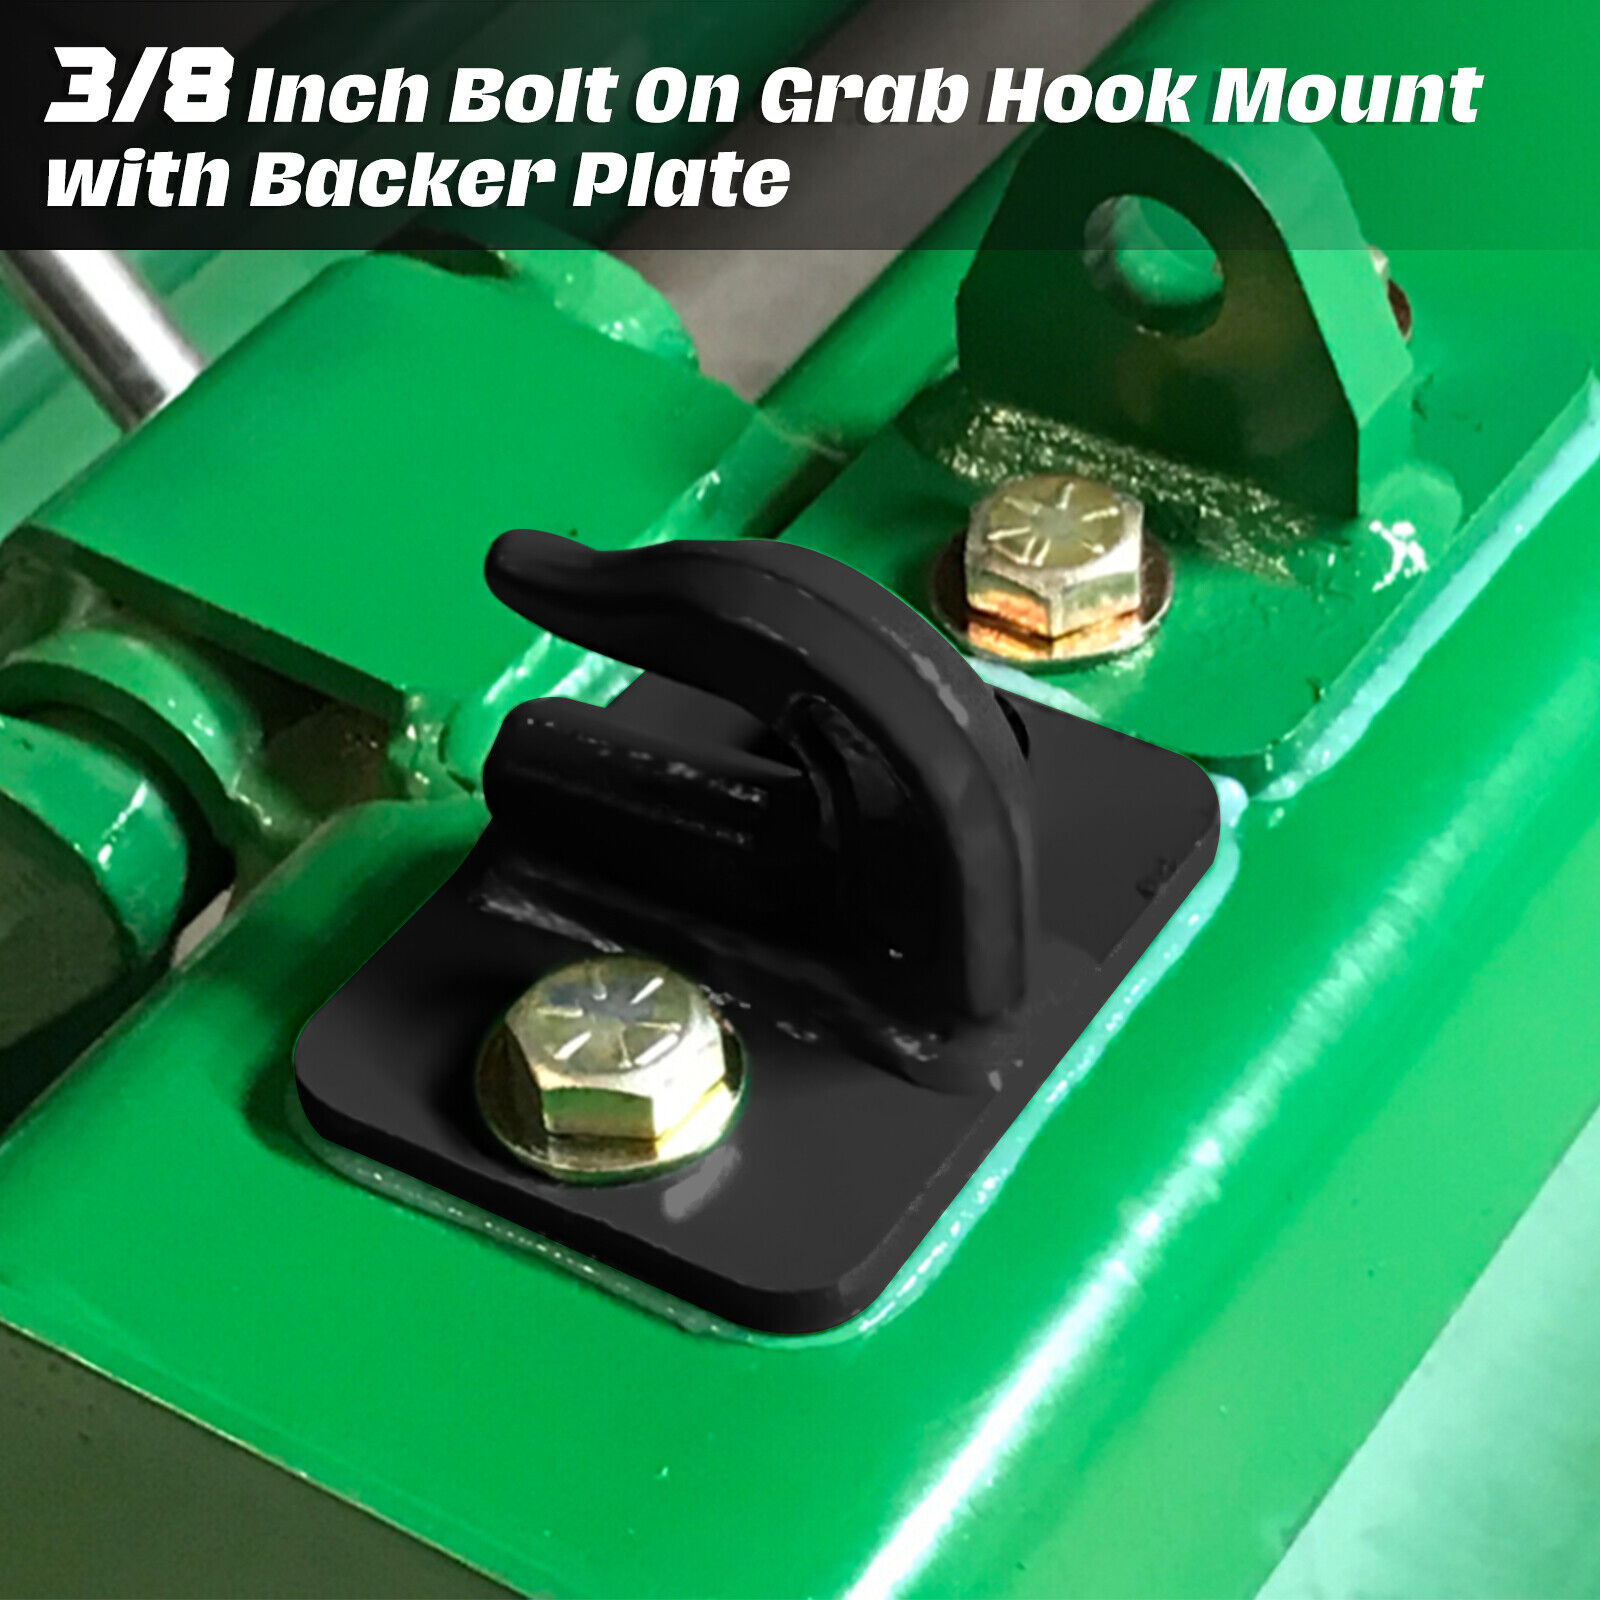 3/8" Bolt On Grab Hooks For Loader Tractor Bucket Heavy Duty Steel Pack Of (2) EBESTTECH Does Not Apply - фотография #3